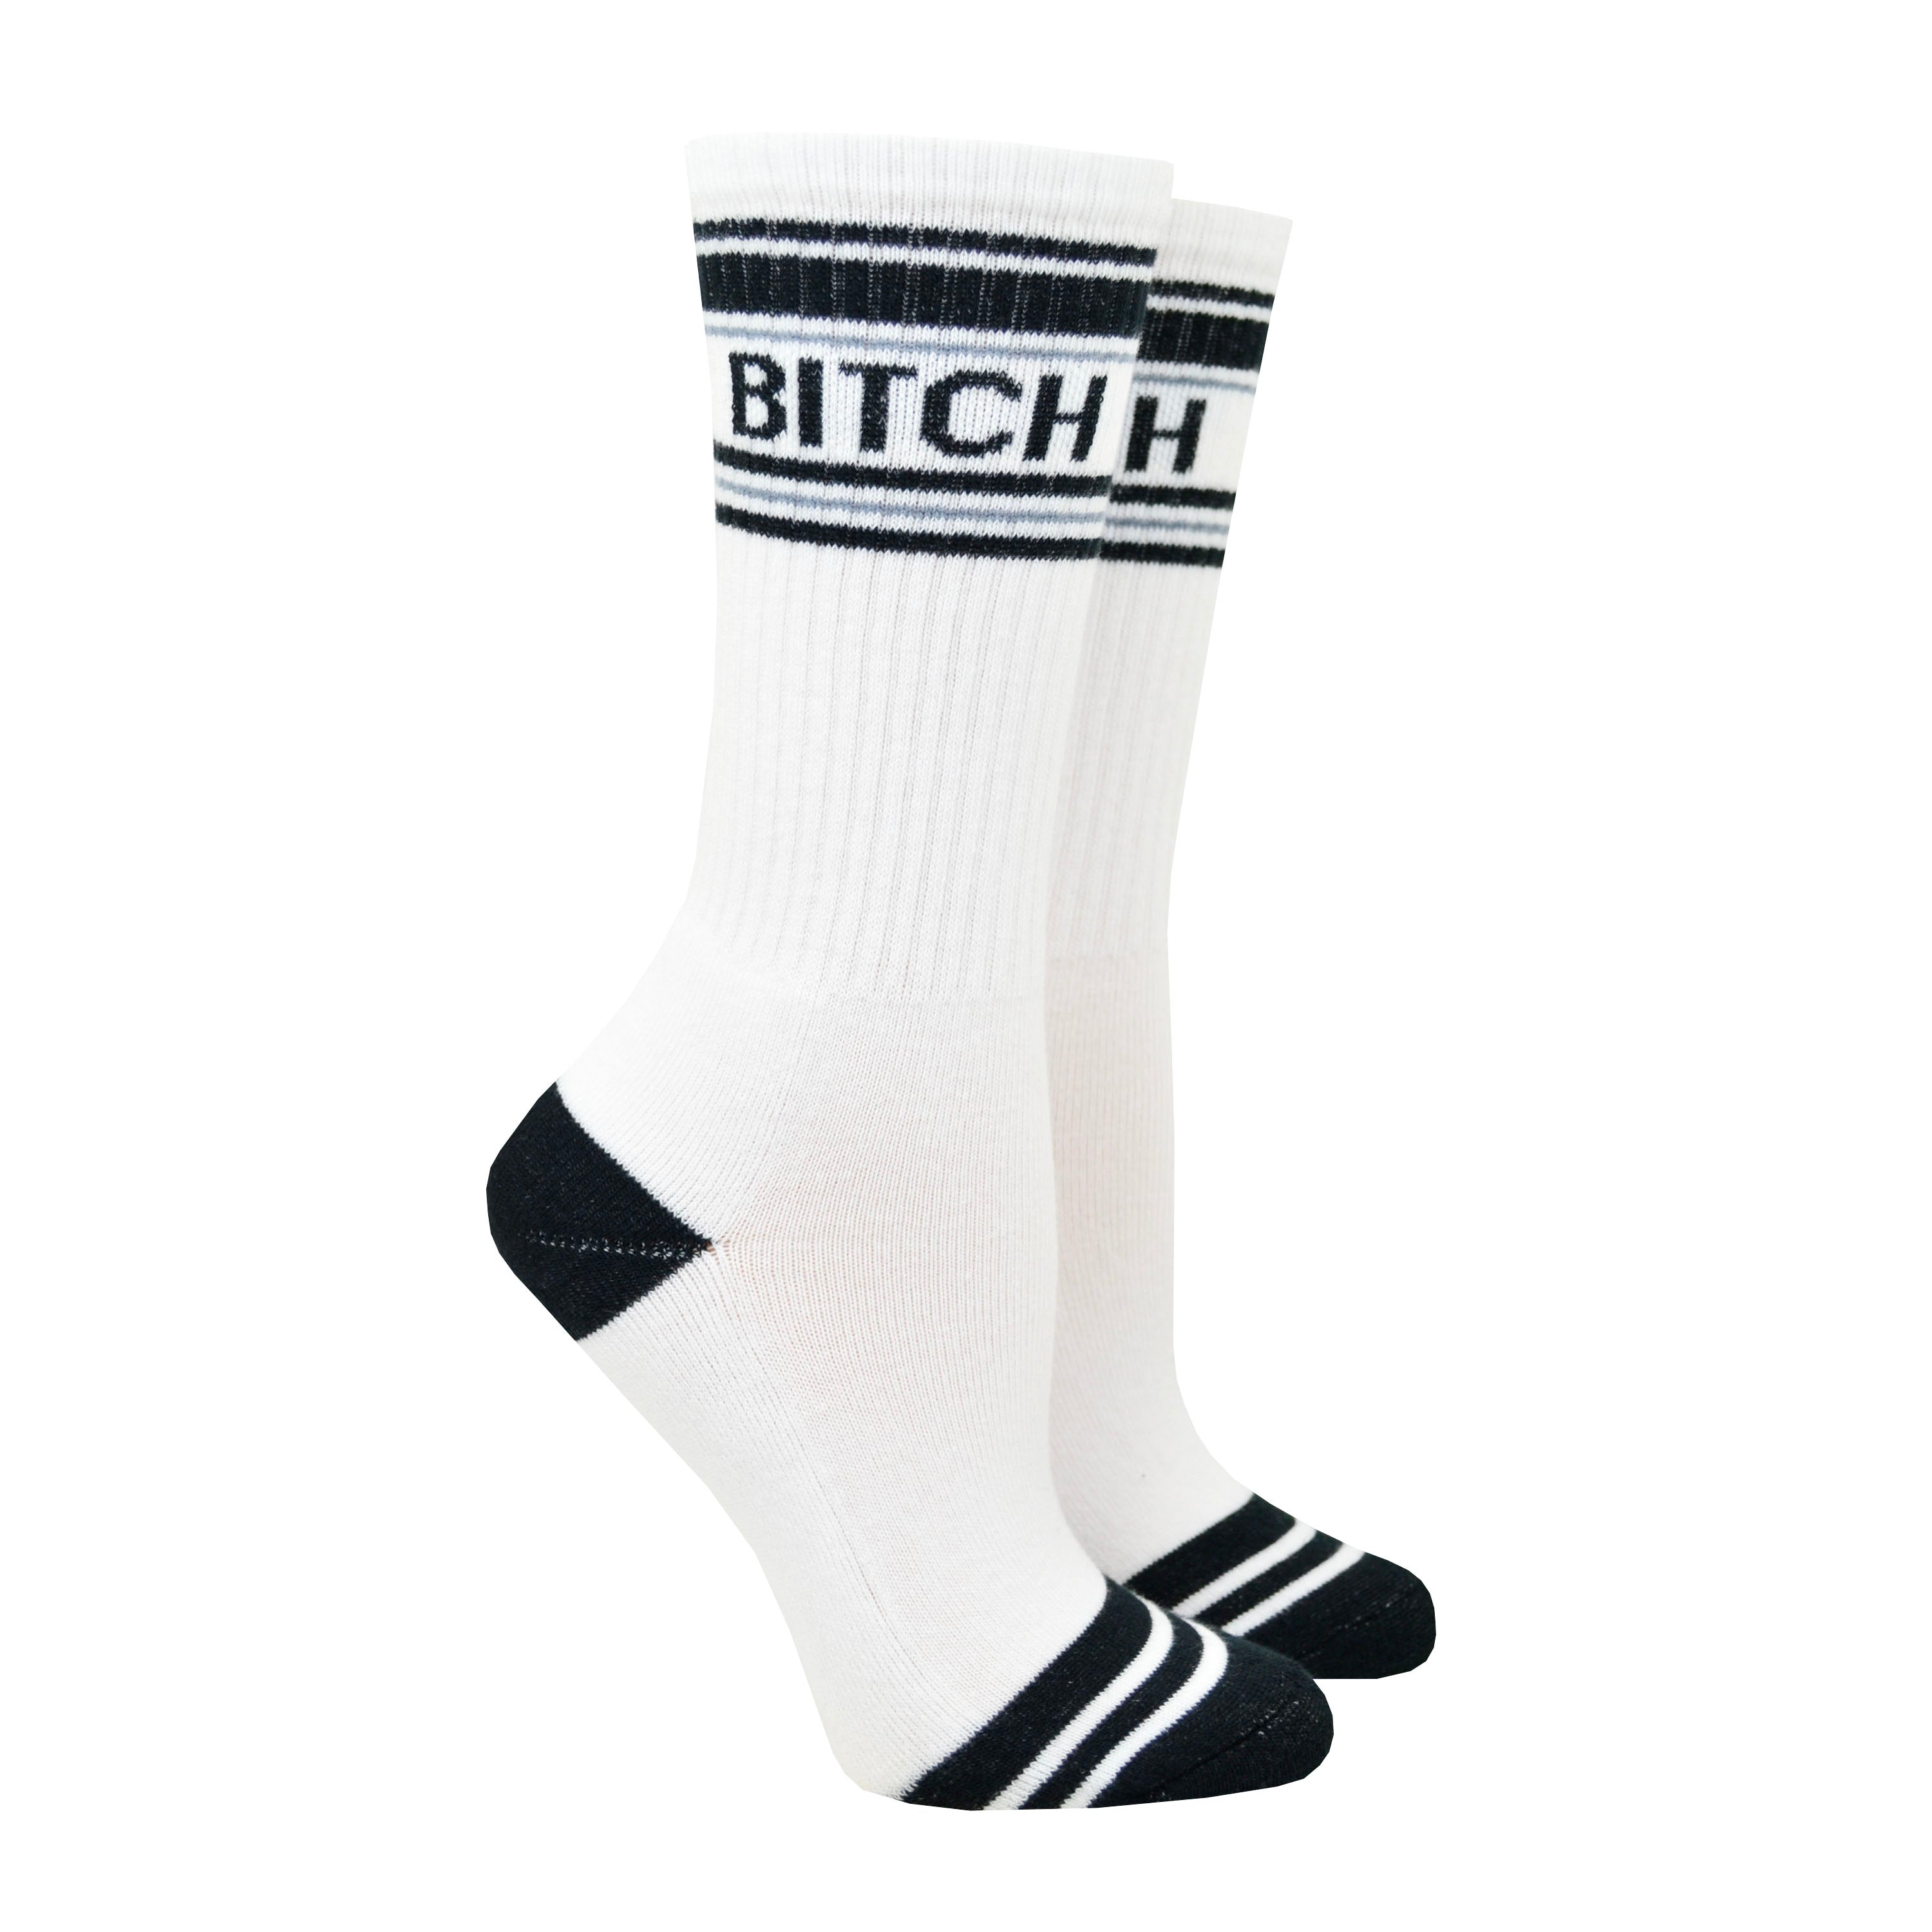 Shown on a leg form, these white cotton unisex crew socks with a black toe and striped cuff by the brand Gumball Poodle feature the words 